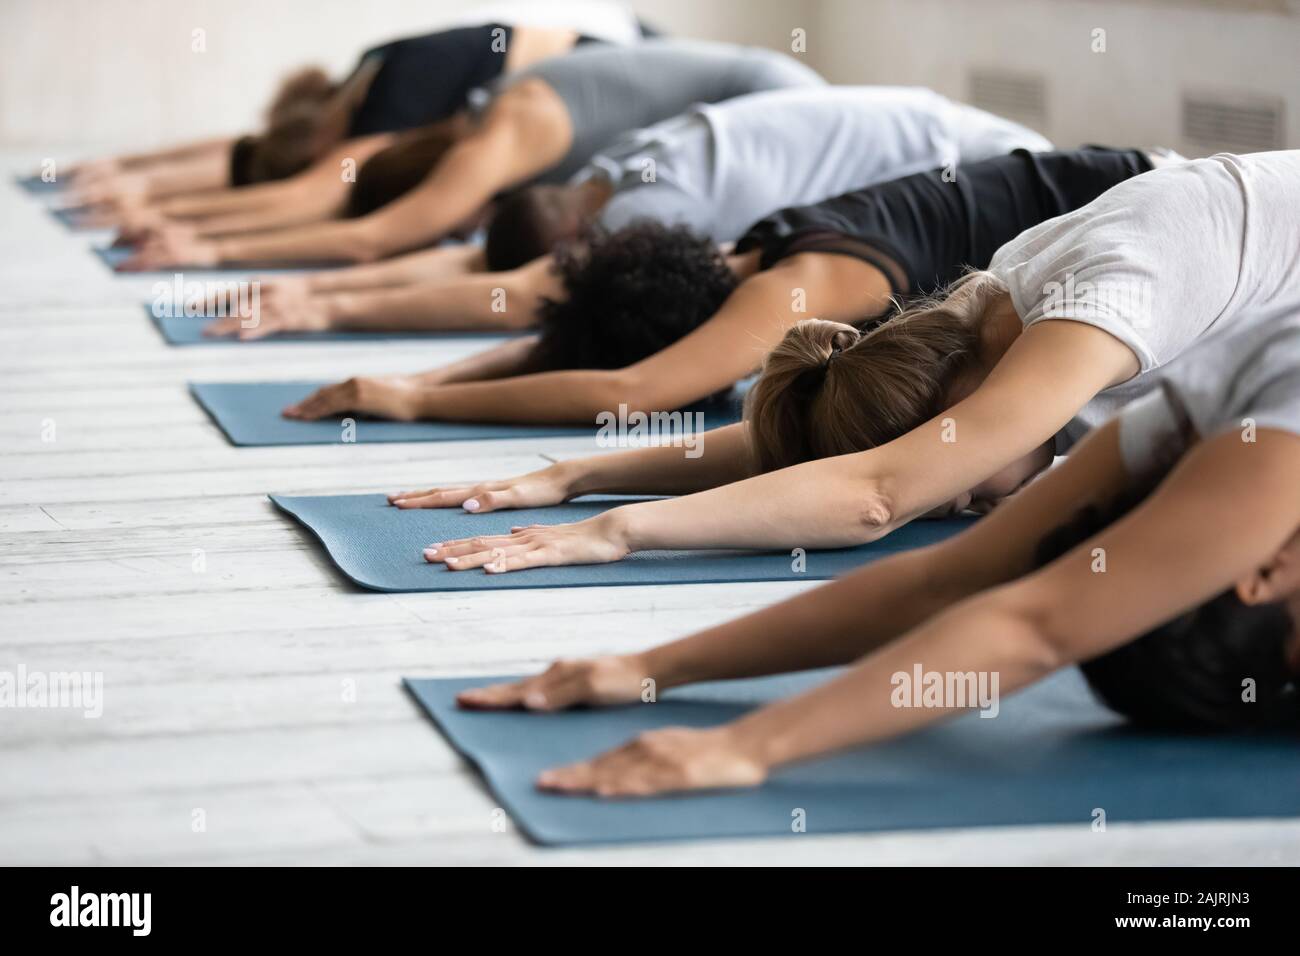 Diverse people stretching in Child pose in row, practicing yoga Stock Photo